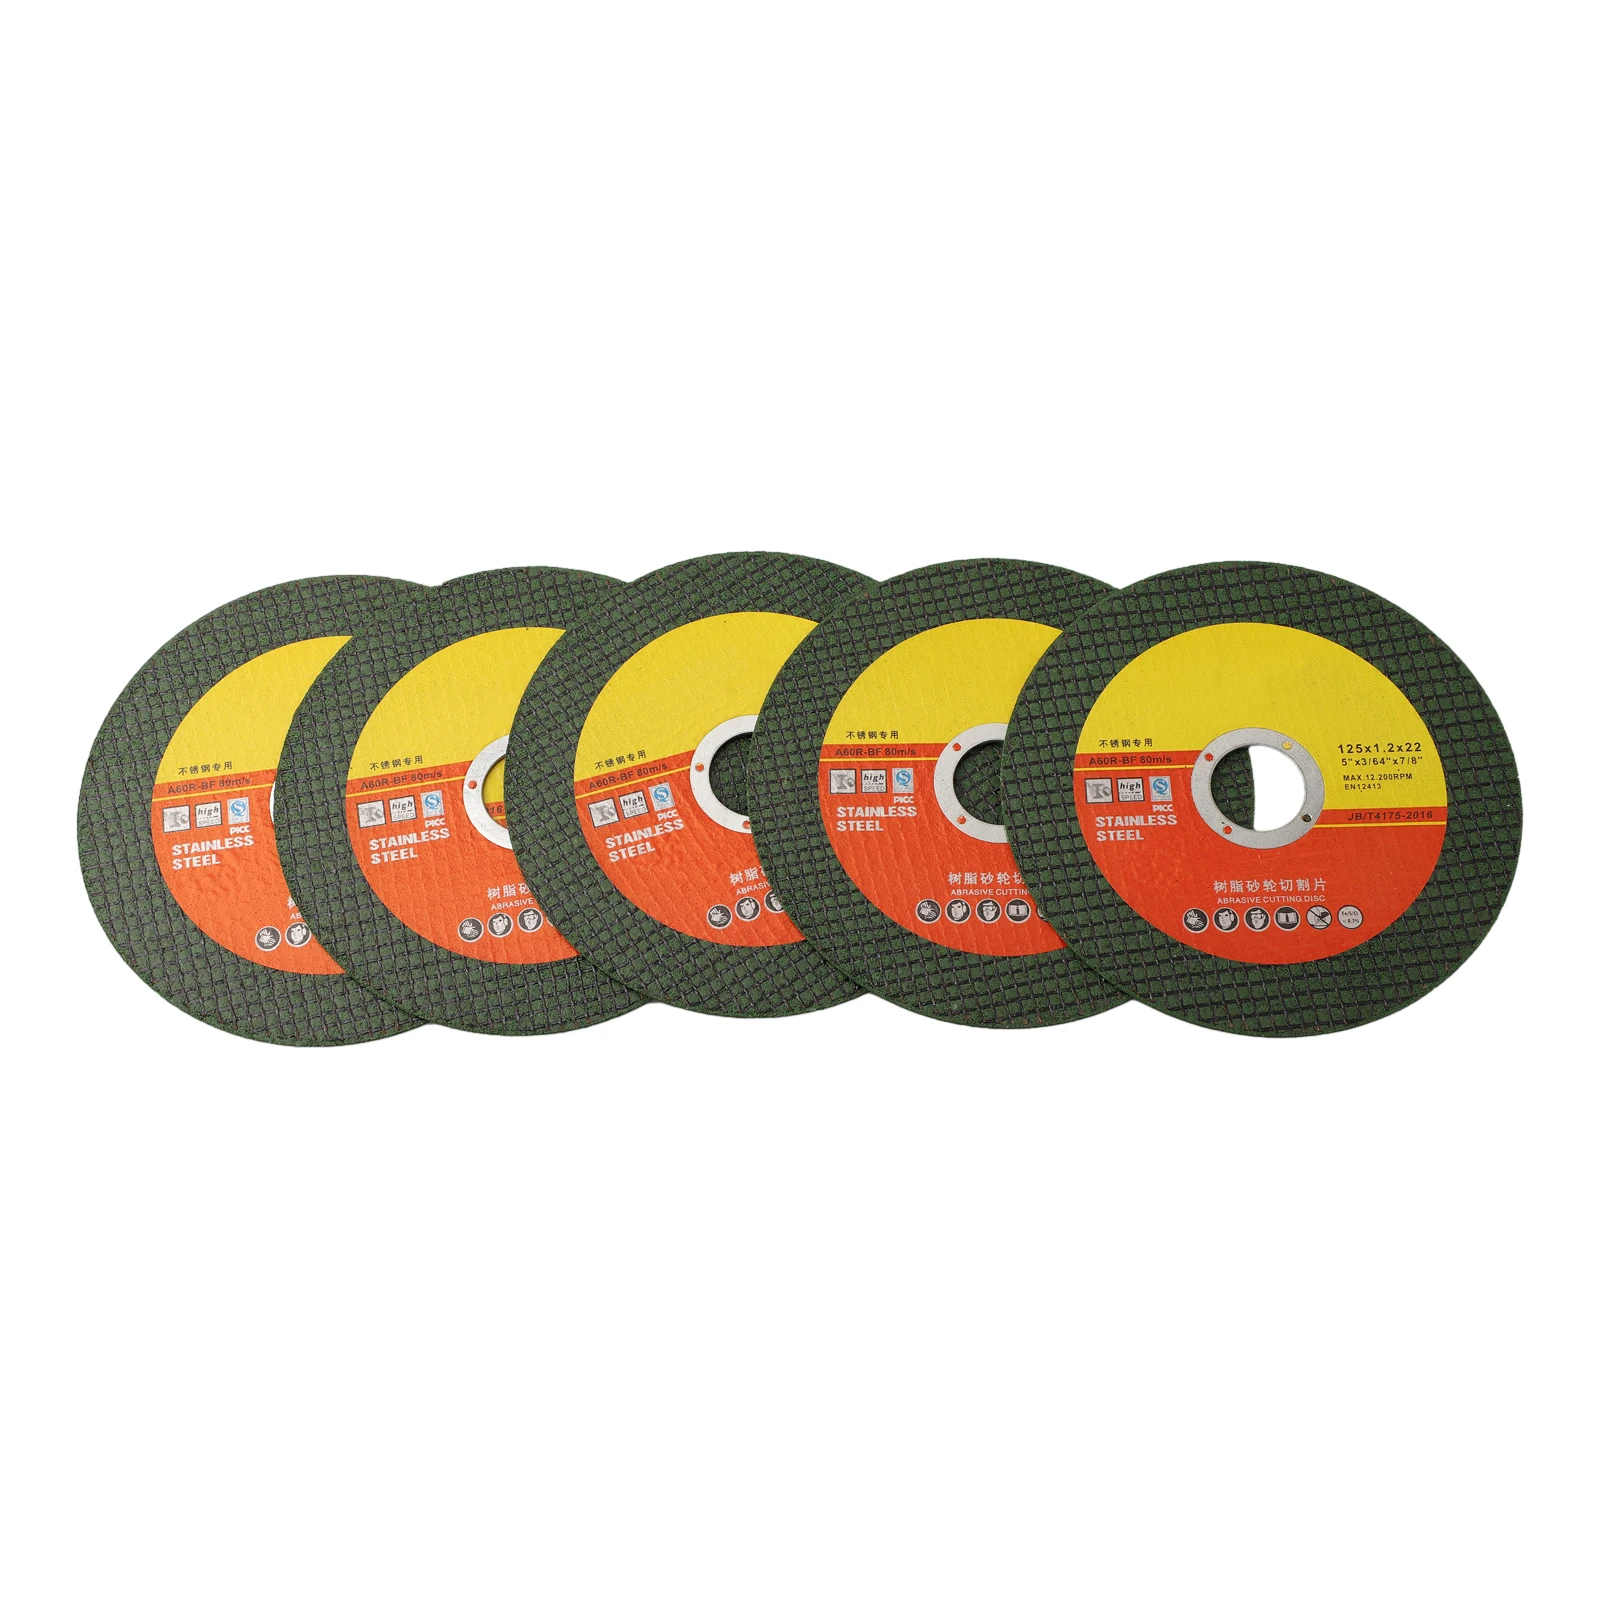 5pcs 125mm/ 5 Inch Cutting Disc Angle Grinder Stainless Steel Grinding Resin Double Mesh For Grinding Stone Meta Land Polishing 105mm metal cutting disc angle grinder stainless steel grinding cutting resin double mesh ultra thin polishing 5 10pcs